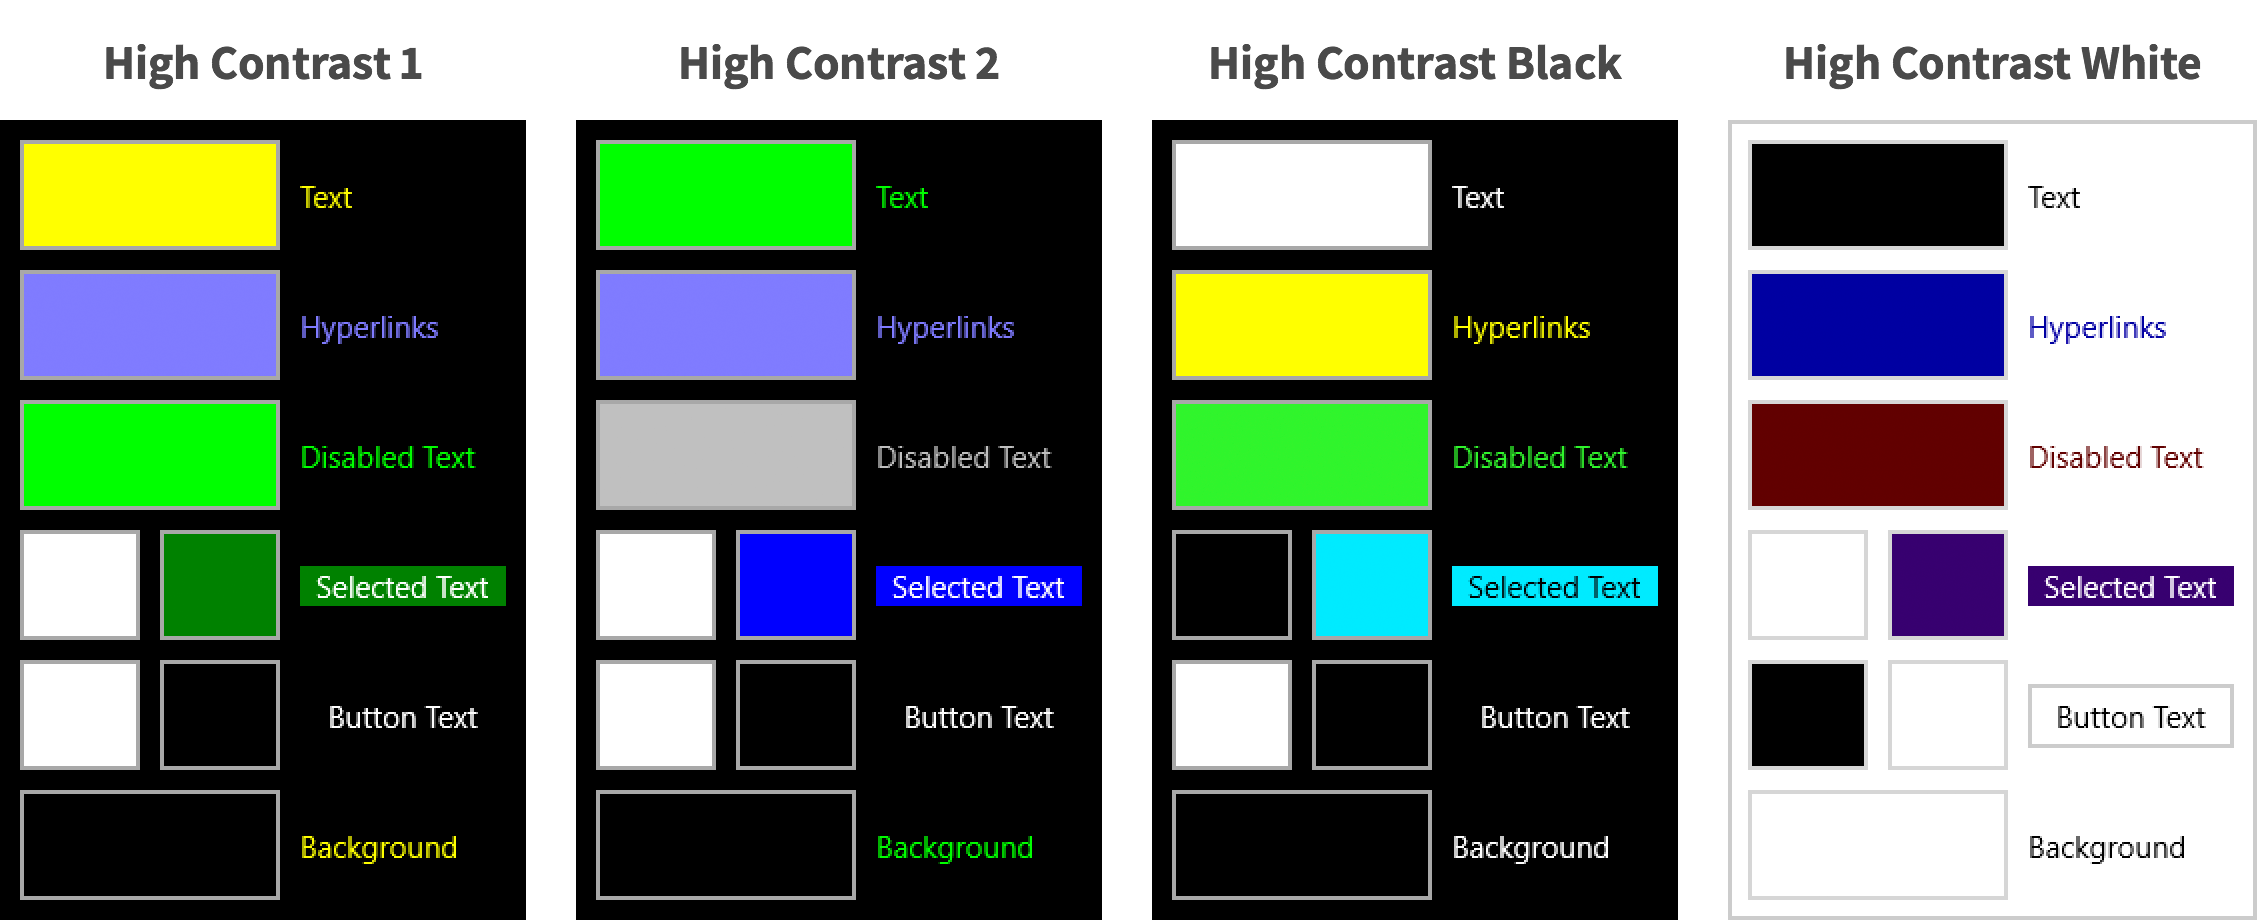 Screenshots of the 4 themes: High Contrast 1, High Contrast 2, High Contrast Black, High Contrast White